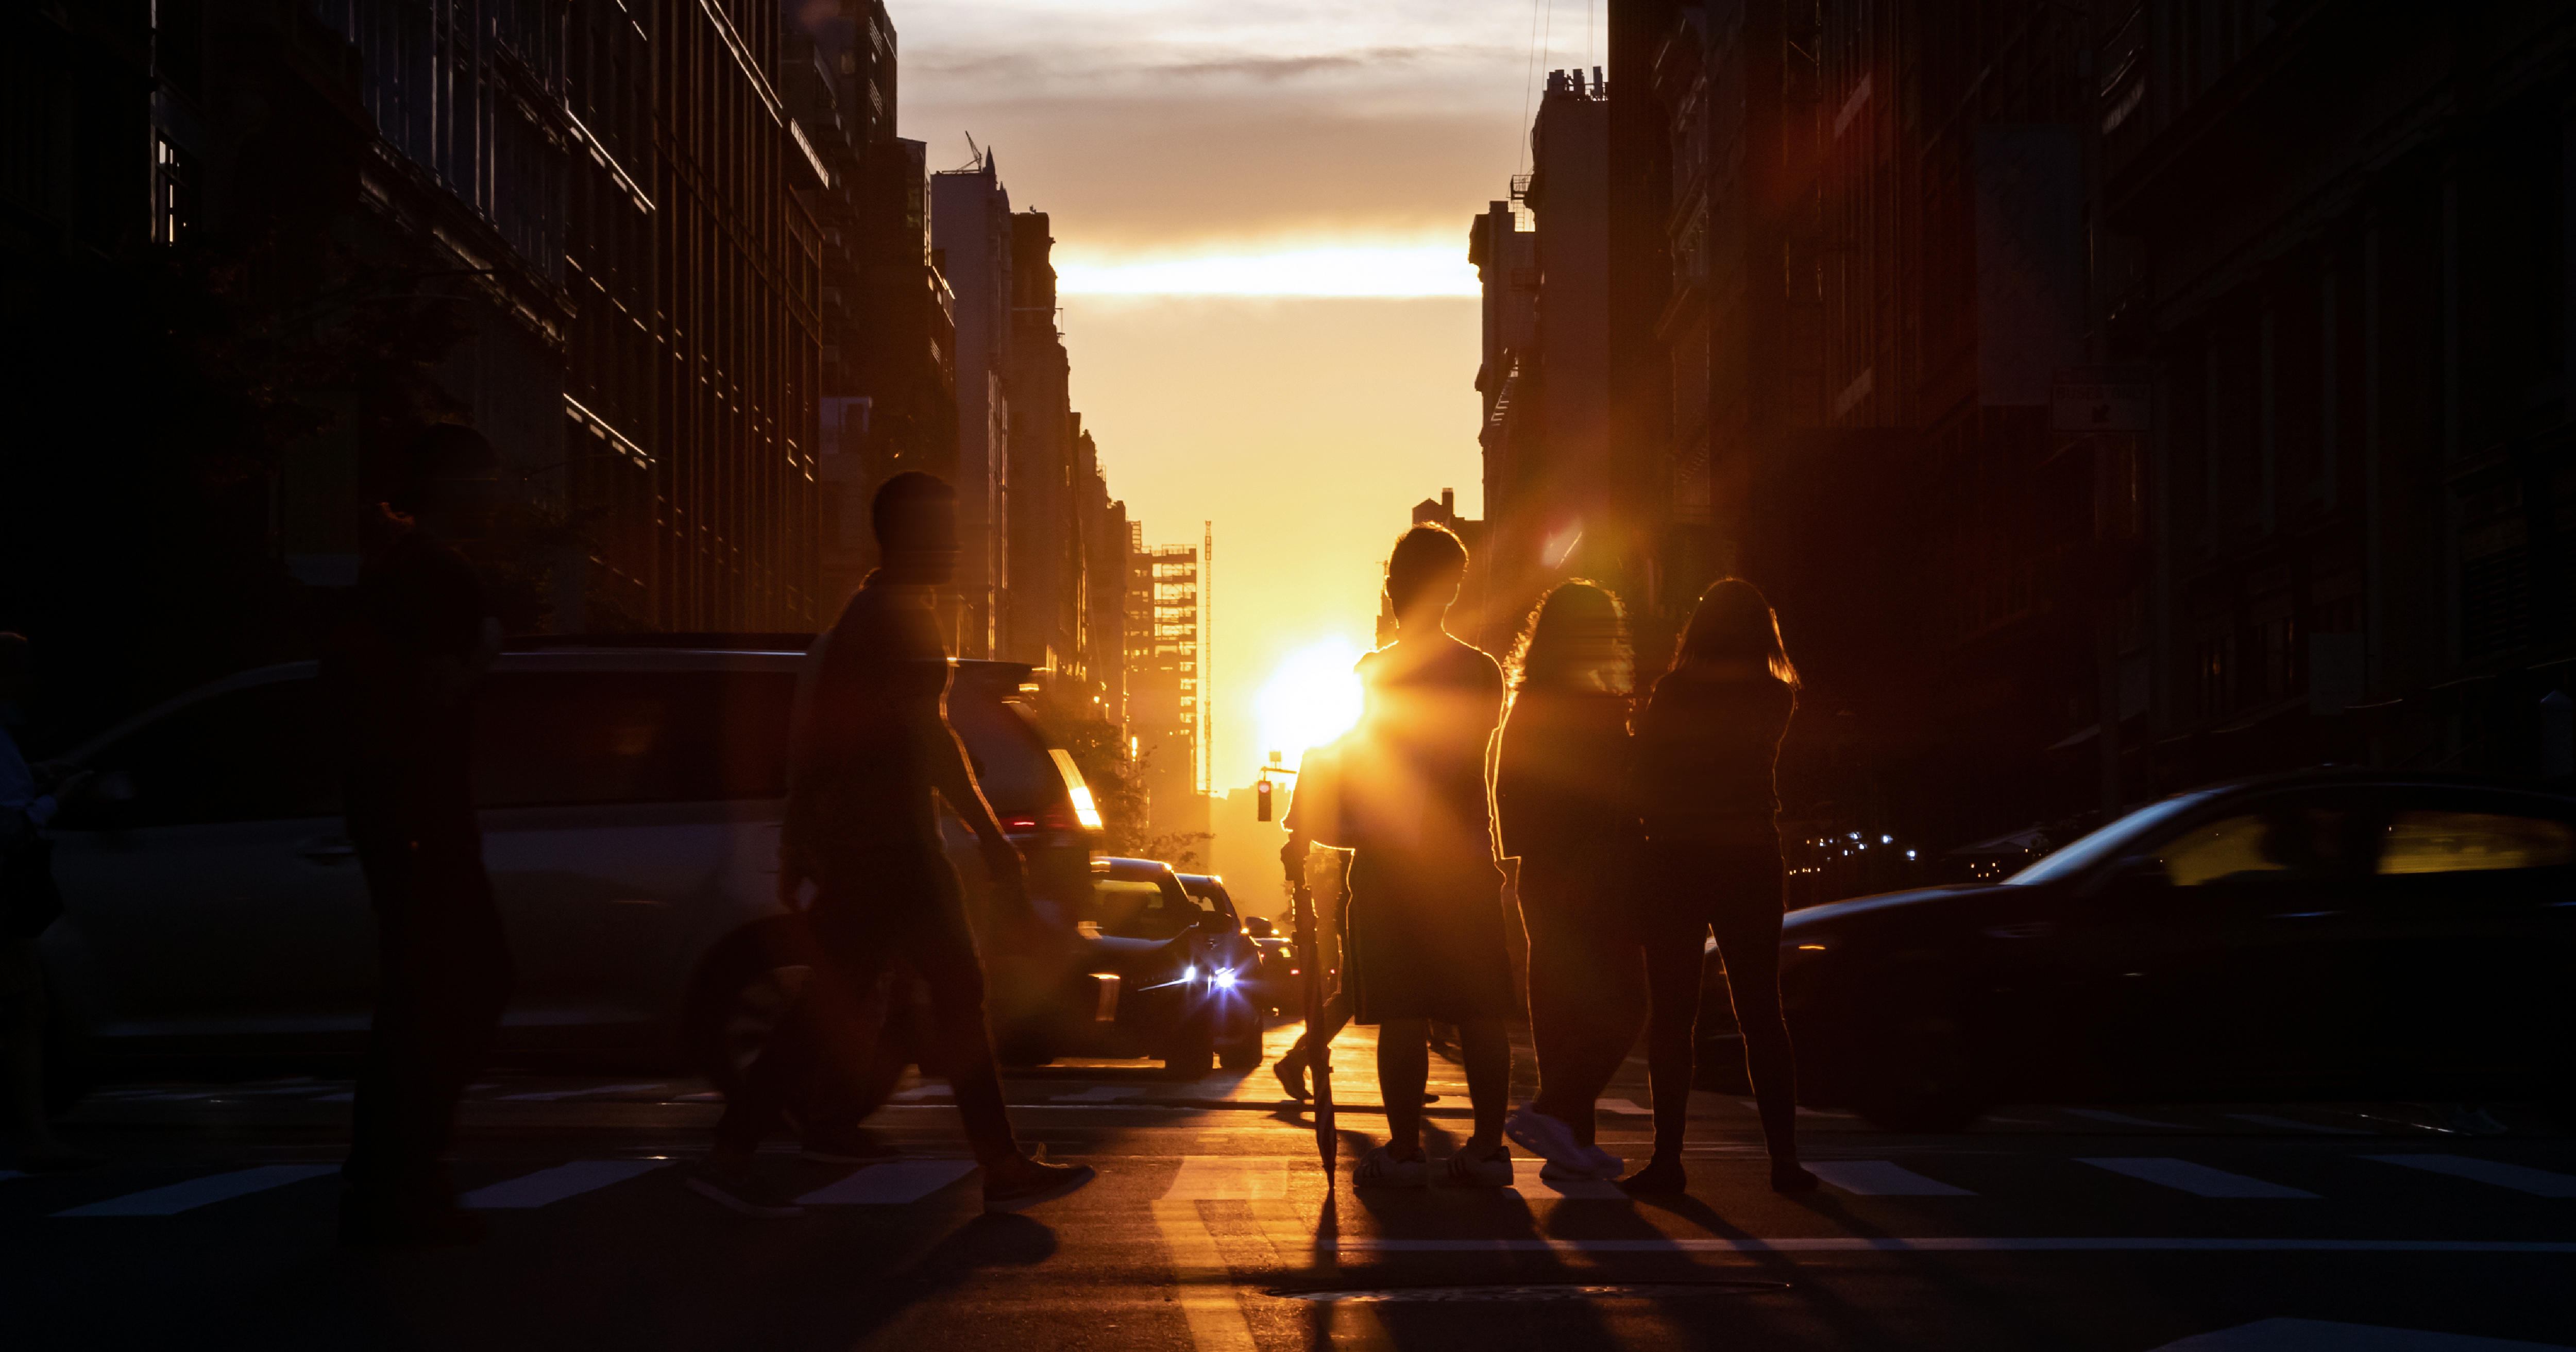 Image shows a crowded intersection with the silhouette of cars and  pedestrians crossing, while the sun sets in the background. 